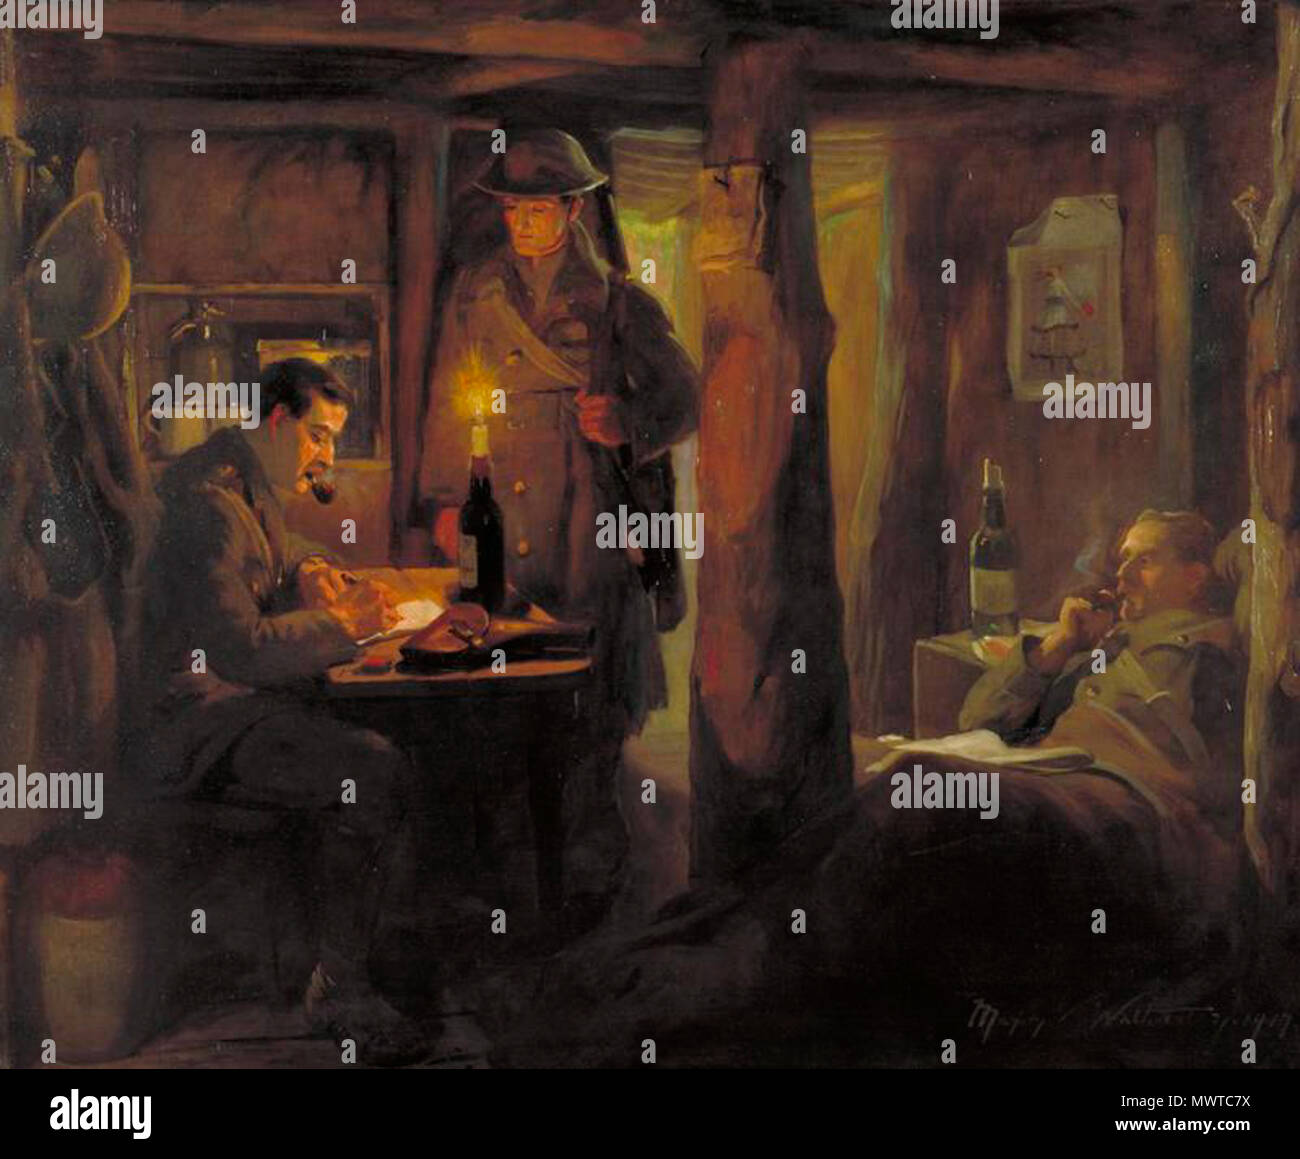 . English: The Dispatch (the Captain's Dugout) image: A dark, candle lit interior of a dug-out. On the left there is an officer smoking a pipe while sitting at a makeshift desk signing a paper. A messenger stands by in helmet and overcoat, waiting for the reply. There is another officer to the right who sits back in a low chair, a newspaper draped over his knees, also smoking a pipe. 1917 (First World War). Creator:Marjorie Violet Watherston 595 The Dispatch (the Captain's Dugout) Art.IWMART5199 Stock Photo